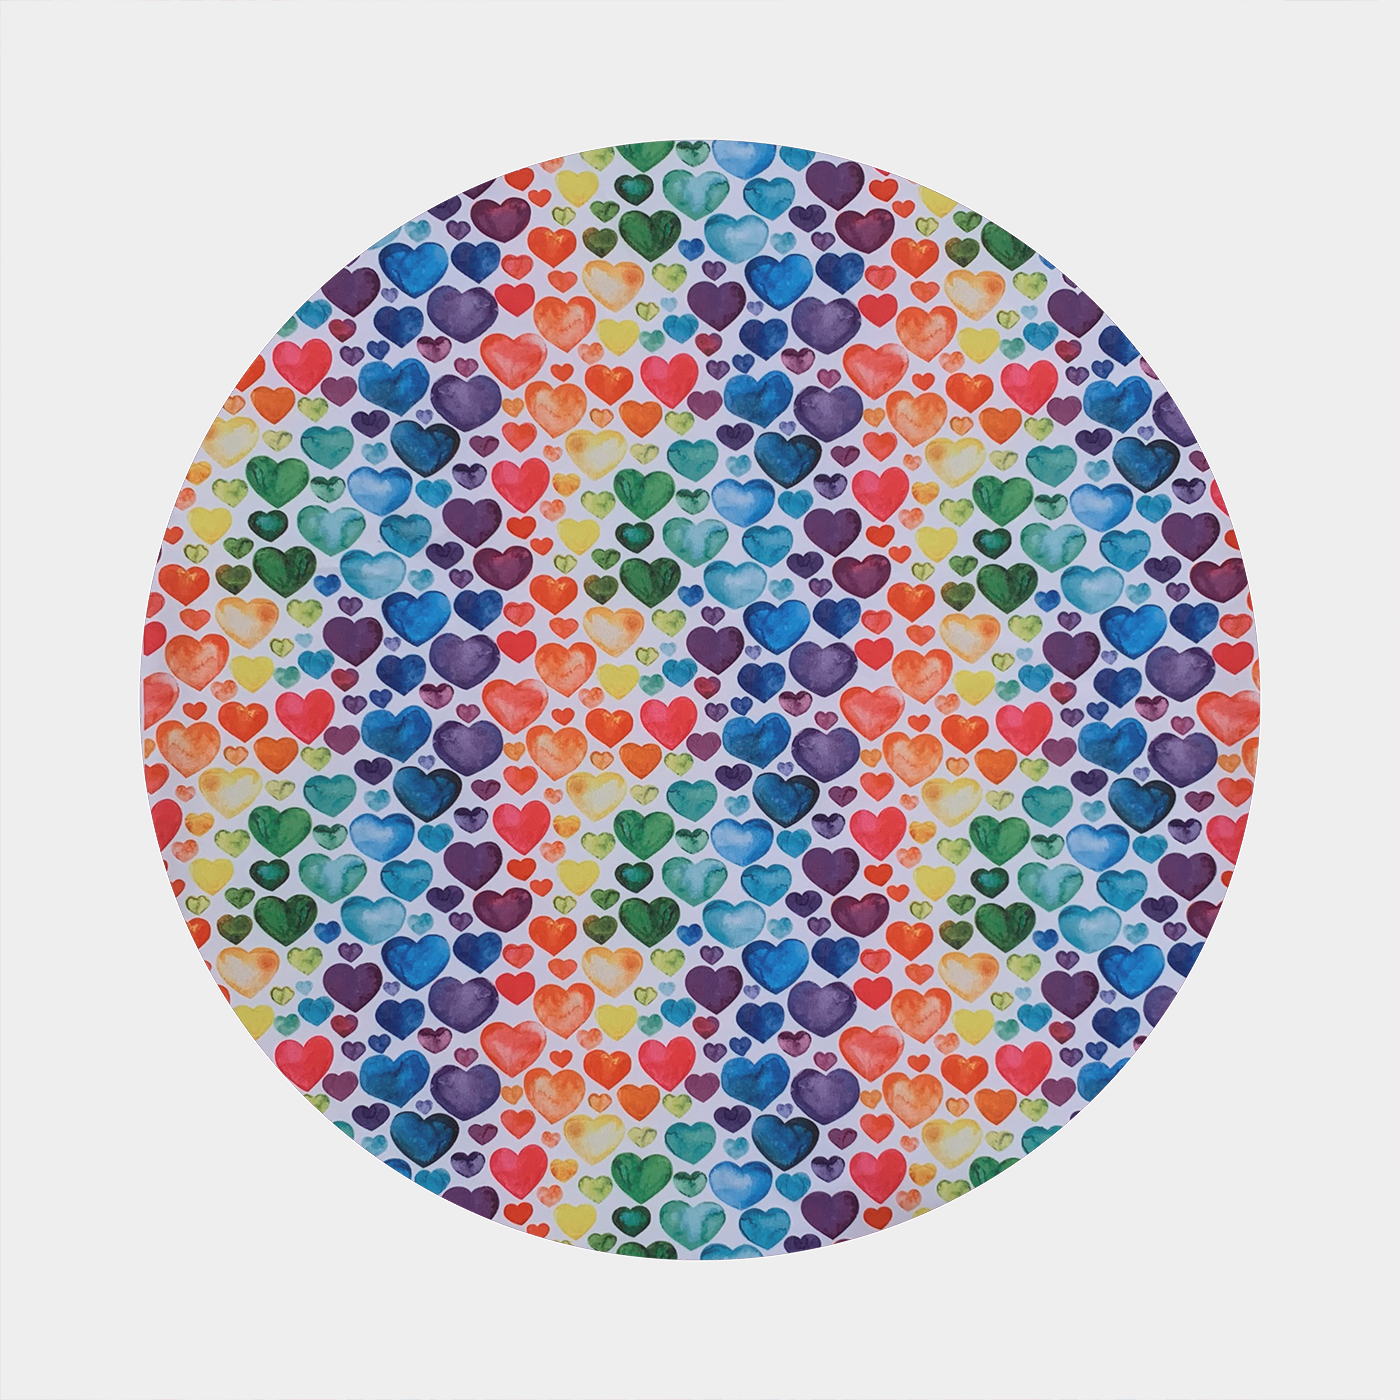 Pattern with white background and blue, purple, red, orange, yellow, and green hearts